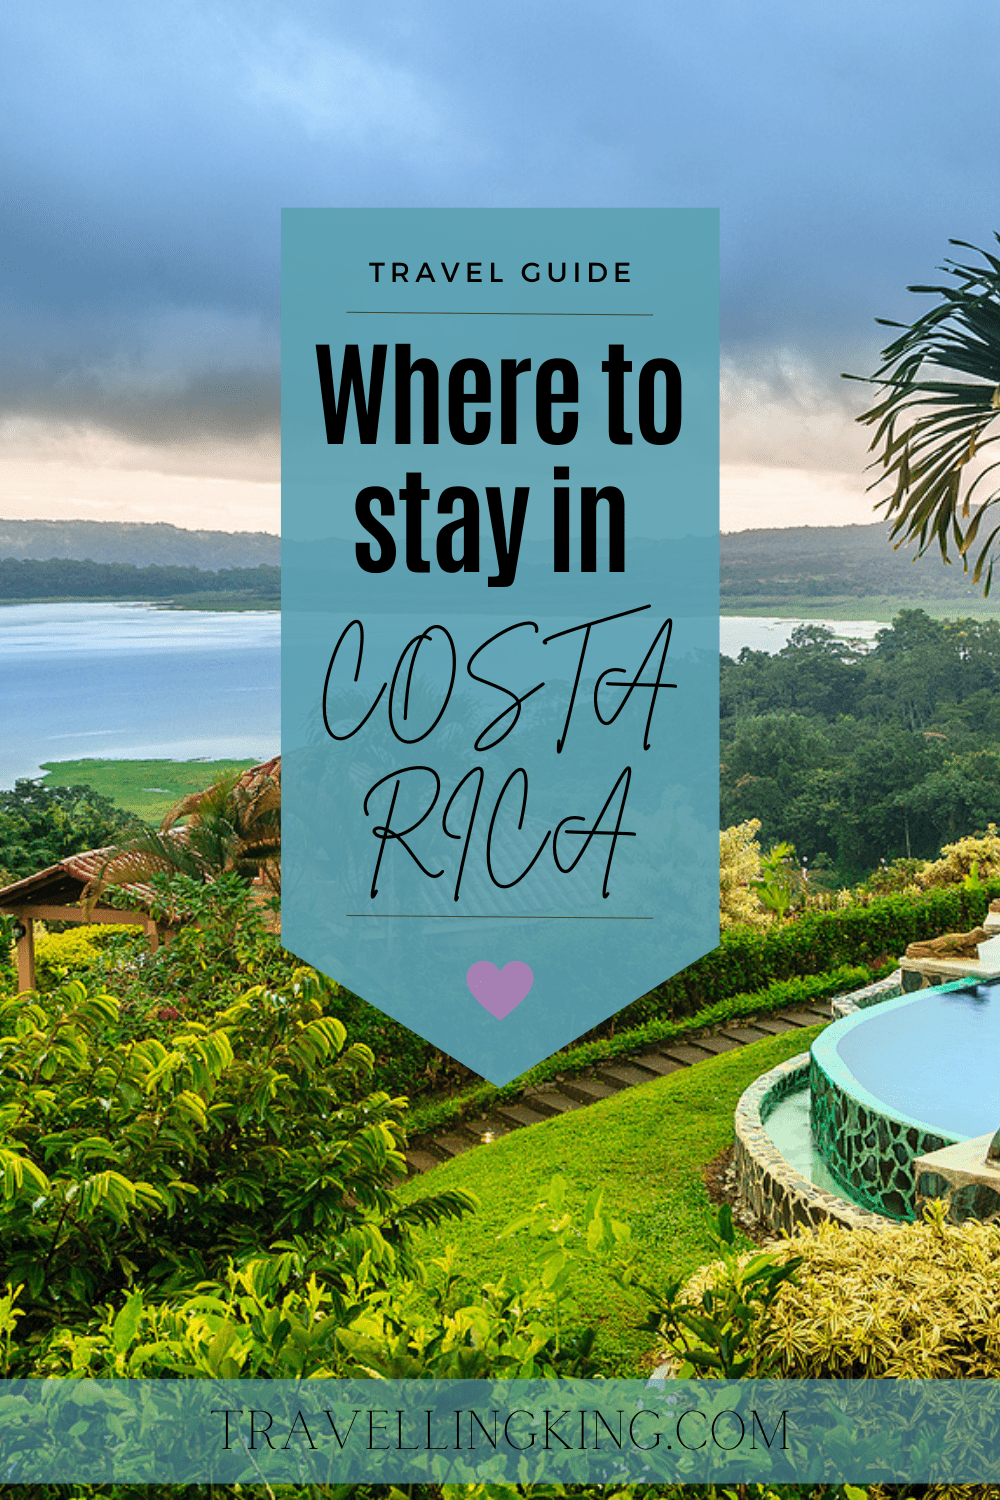 Where to stay in Costa Rica